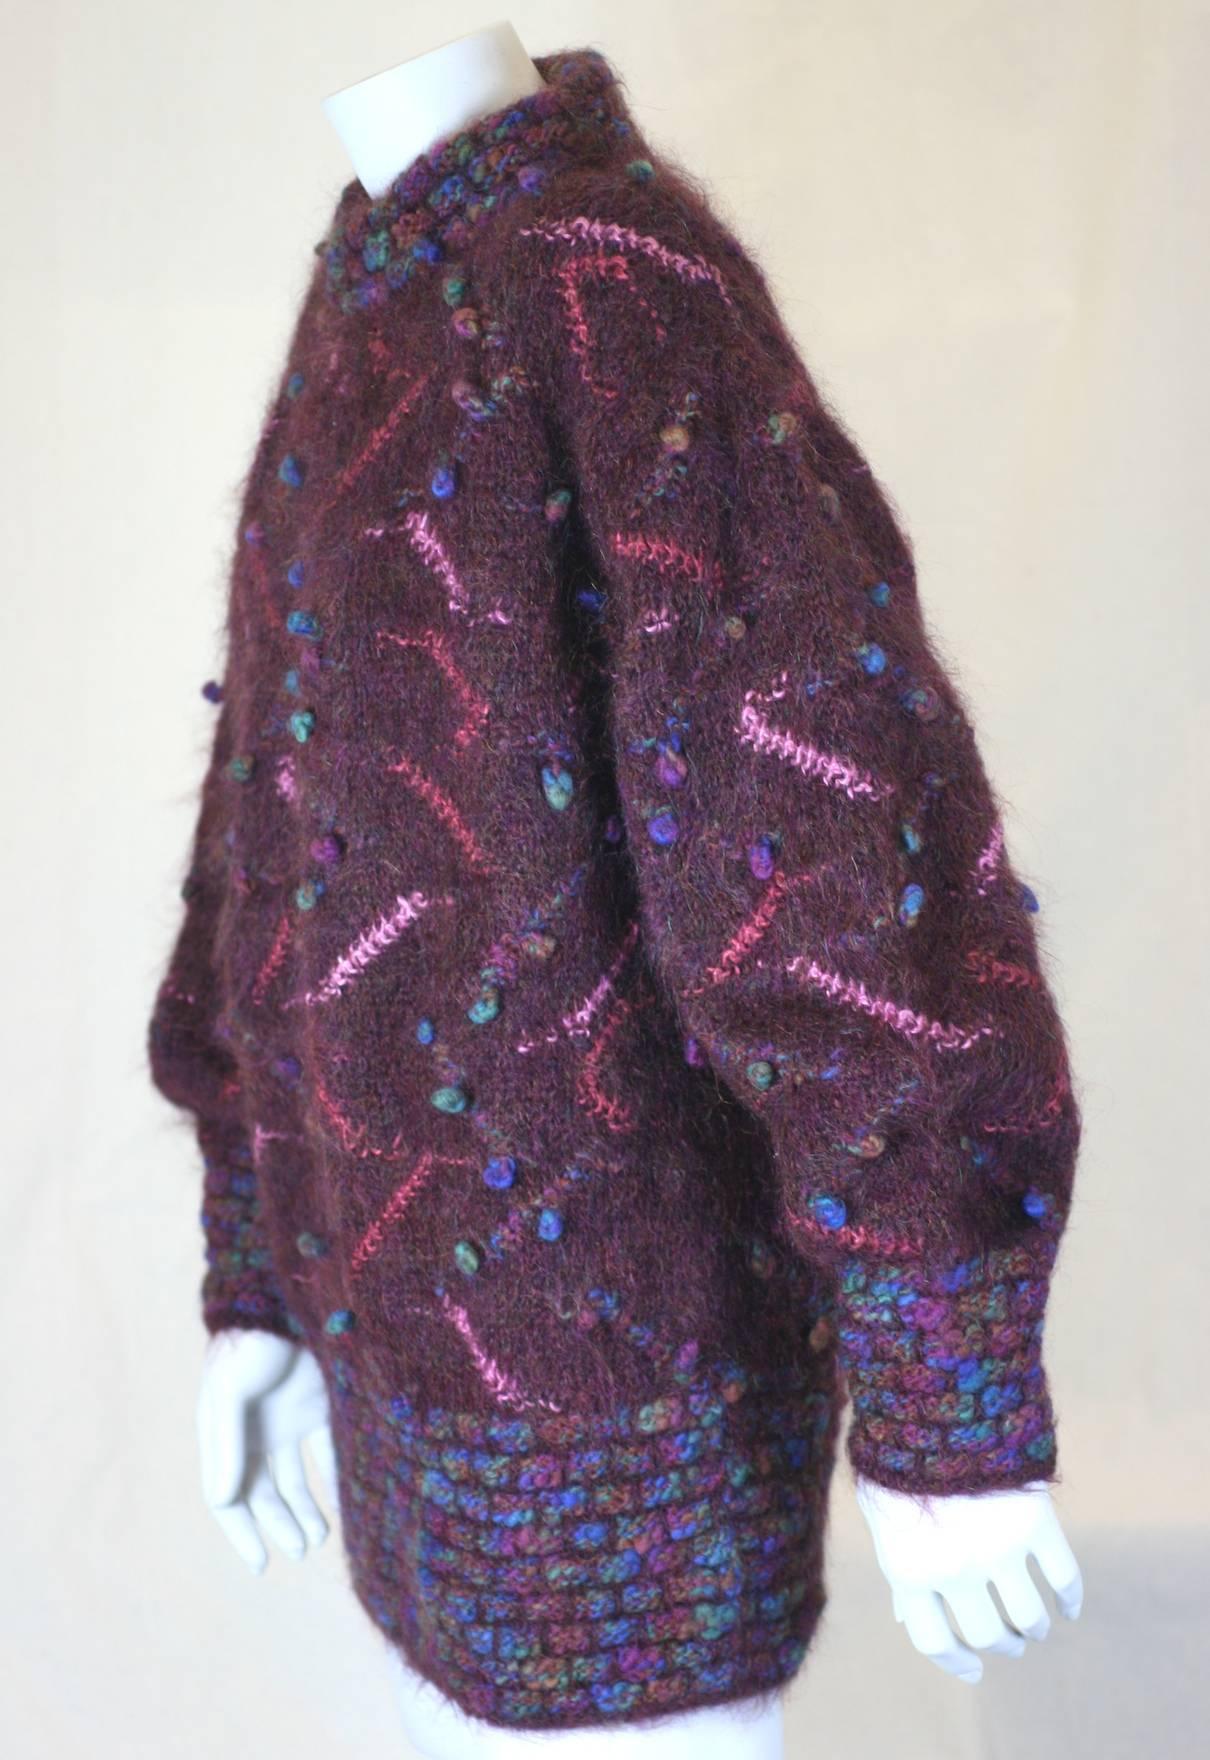 Burberry Berry Handknit Popcorn Knit in deep wine with multicolored decoration and poms poms.  Deep collar, cuffs and hem knit. Handknit, oversized 1980's UK. 100% Wool. Size 1 UK.
Length 28